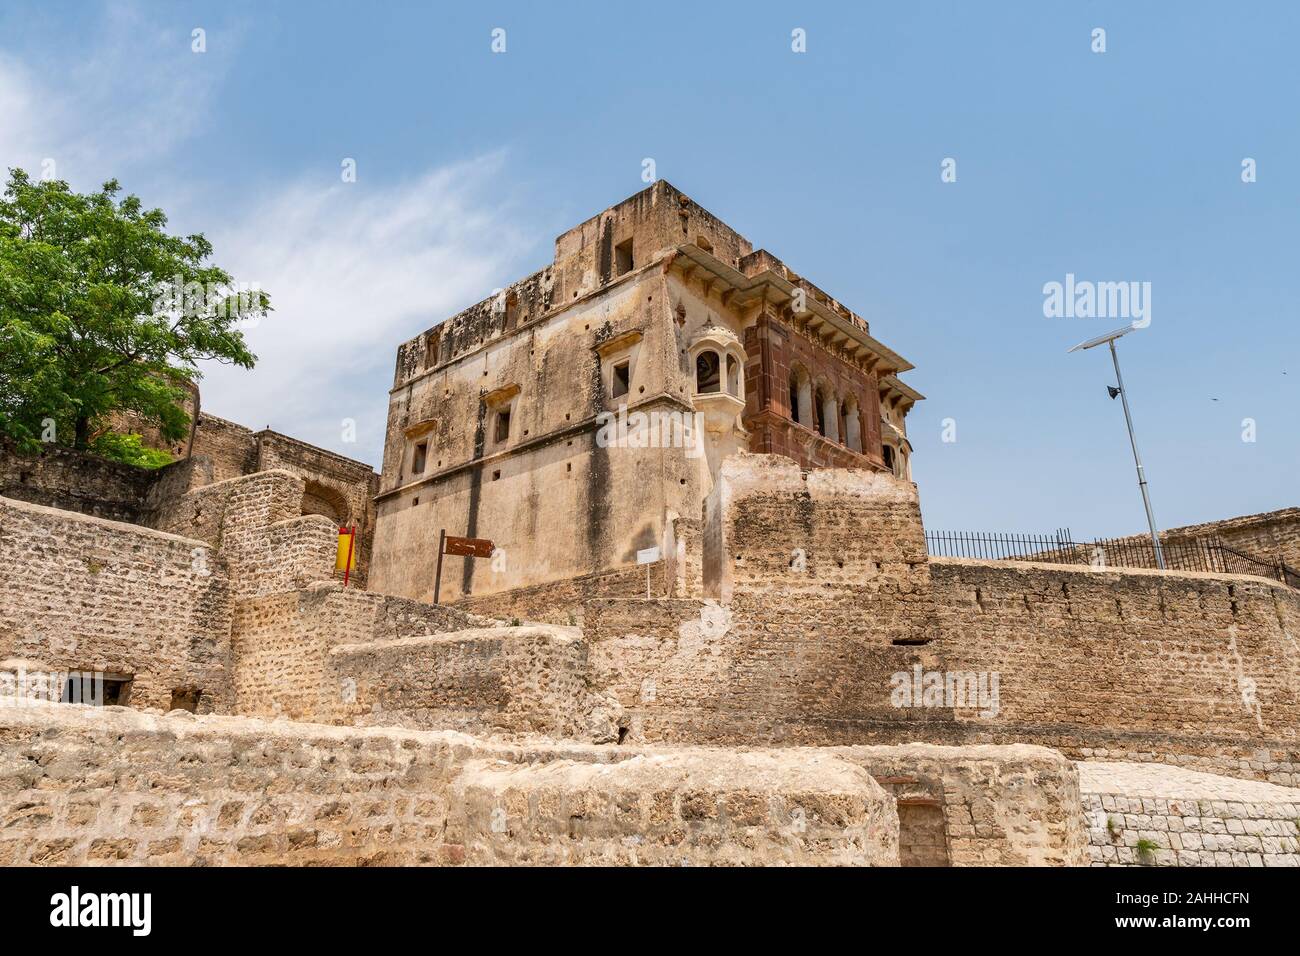 Chakwal Qila Katas Raj Hindu Temples Dedicated to Shiva Picturesque View of a Palace on a Sunny Blue Sky Day Stock Photo